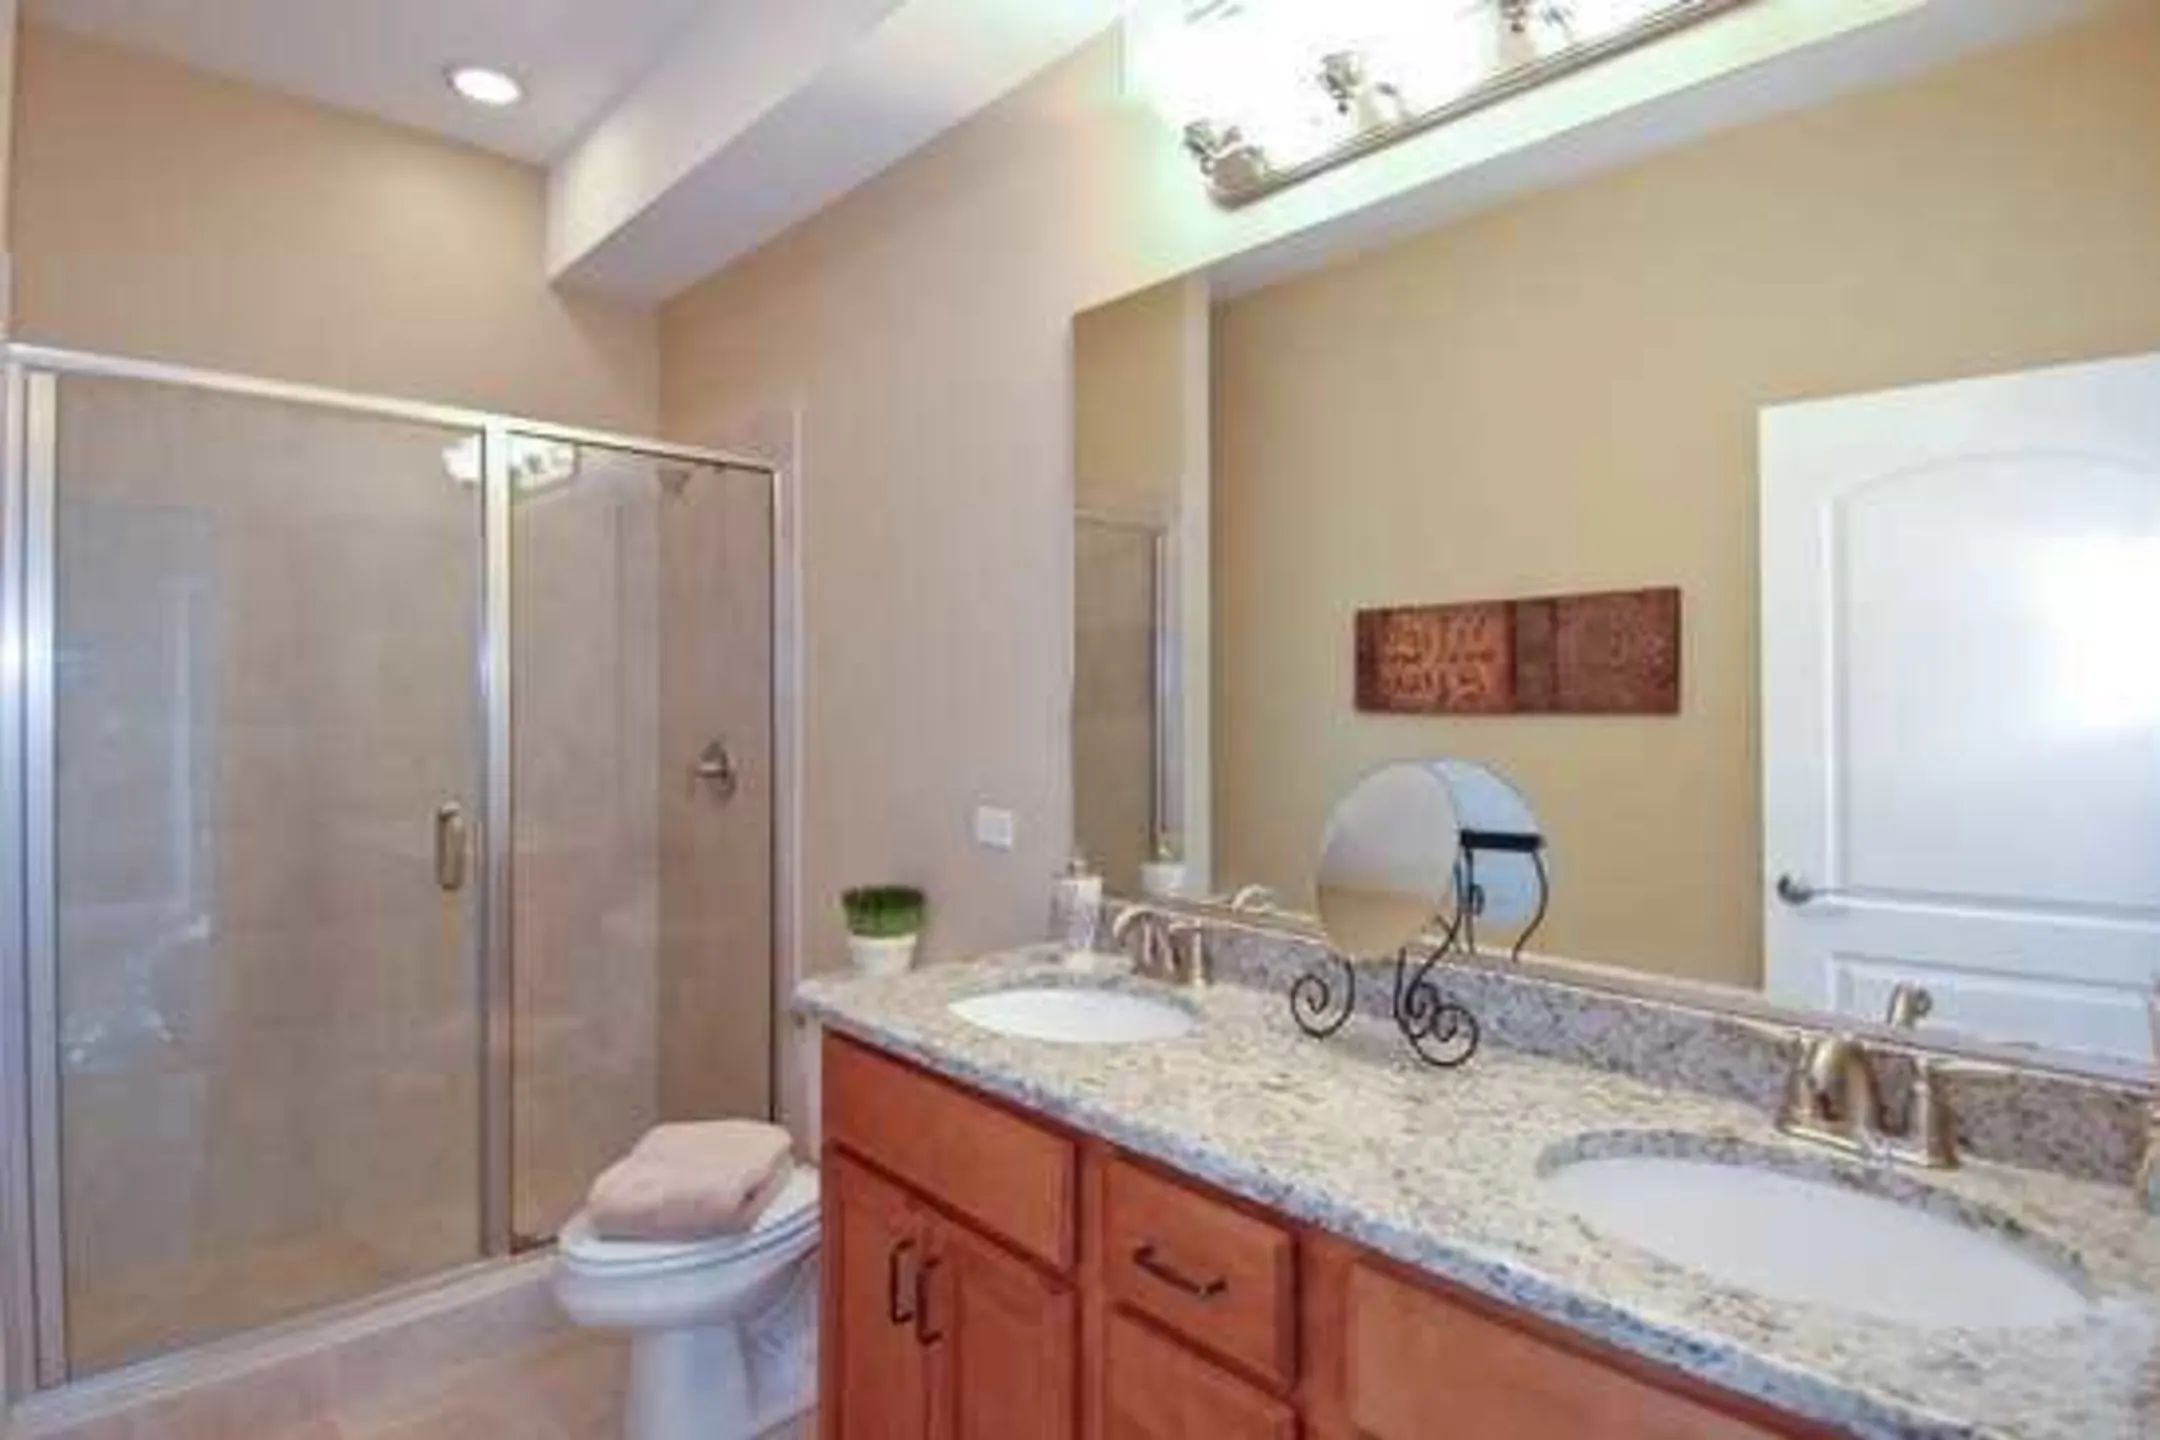 Bathroom - River Place Luxury Residences - McHenry, IL